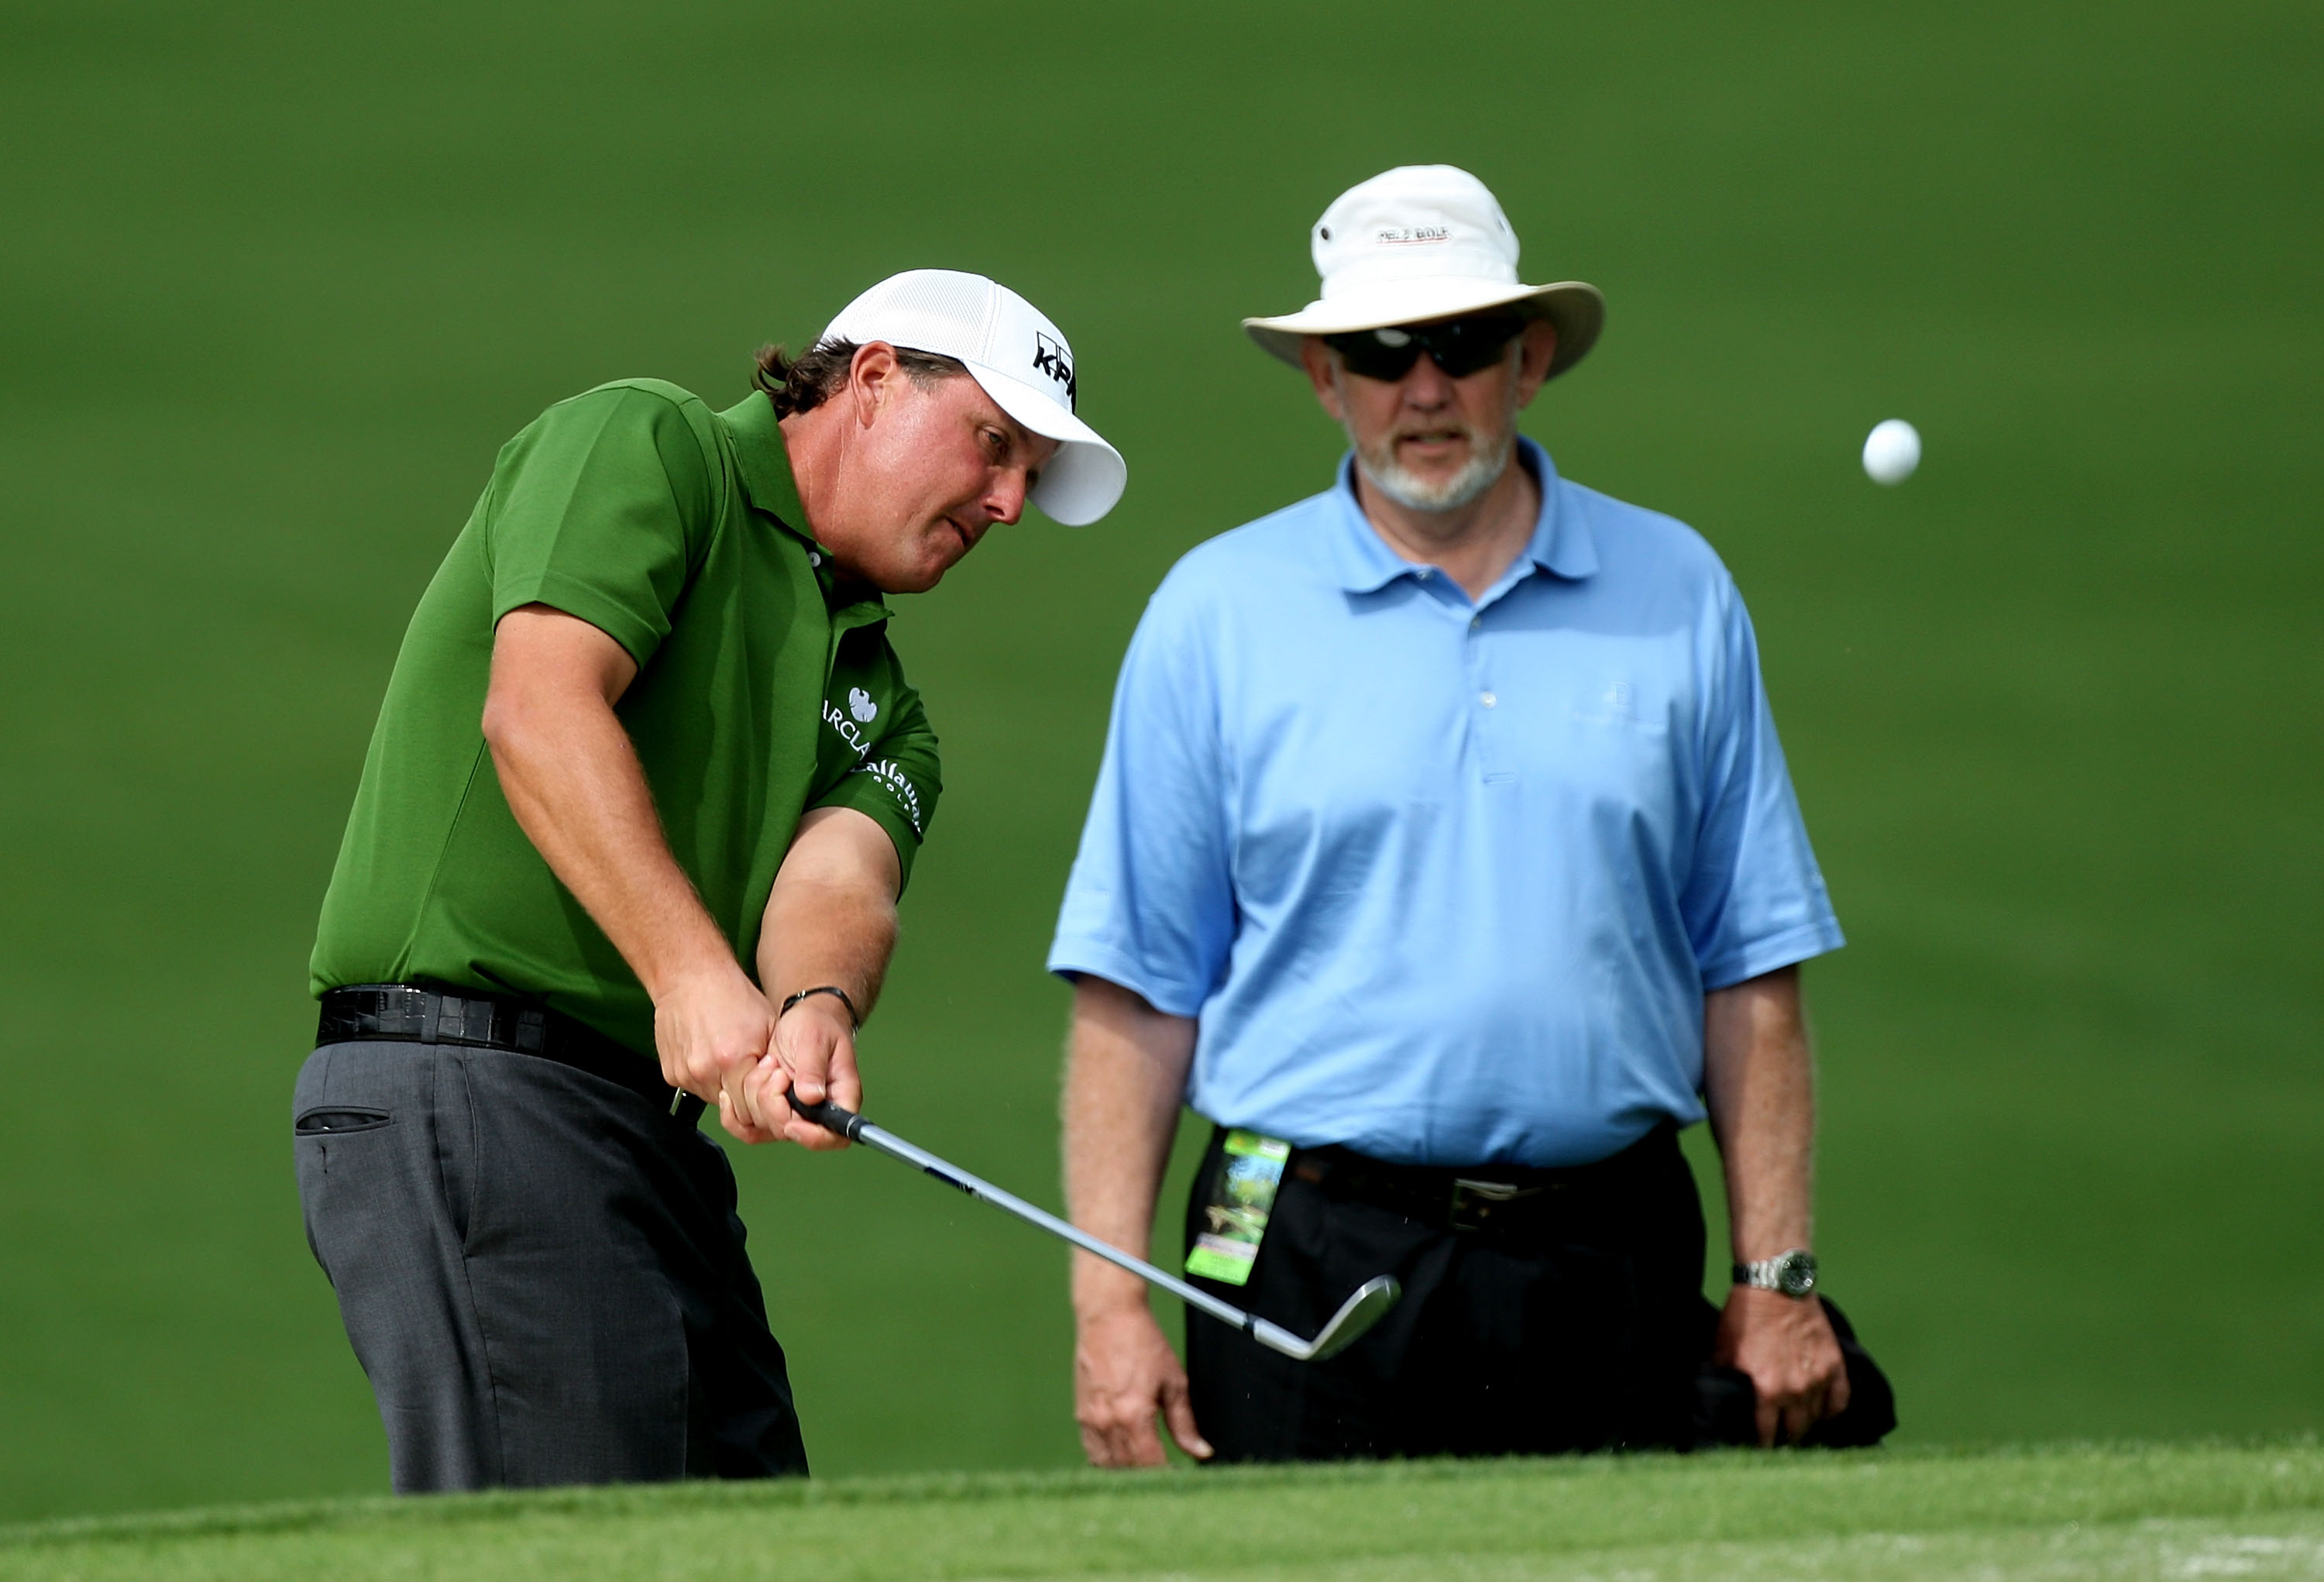 Dave Pelz Interview: Putting is not the most important part of golf